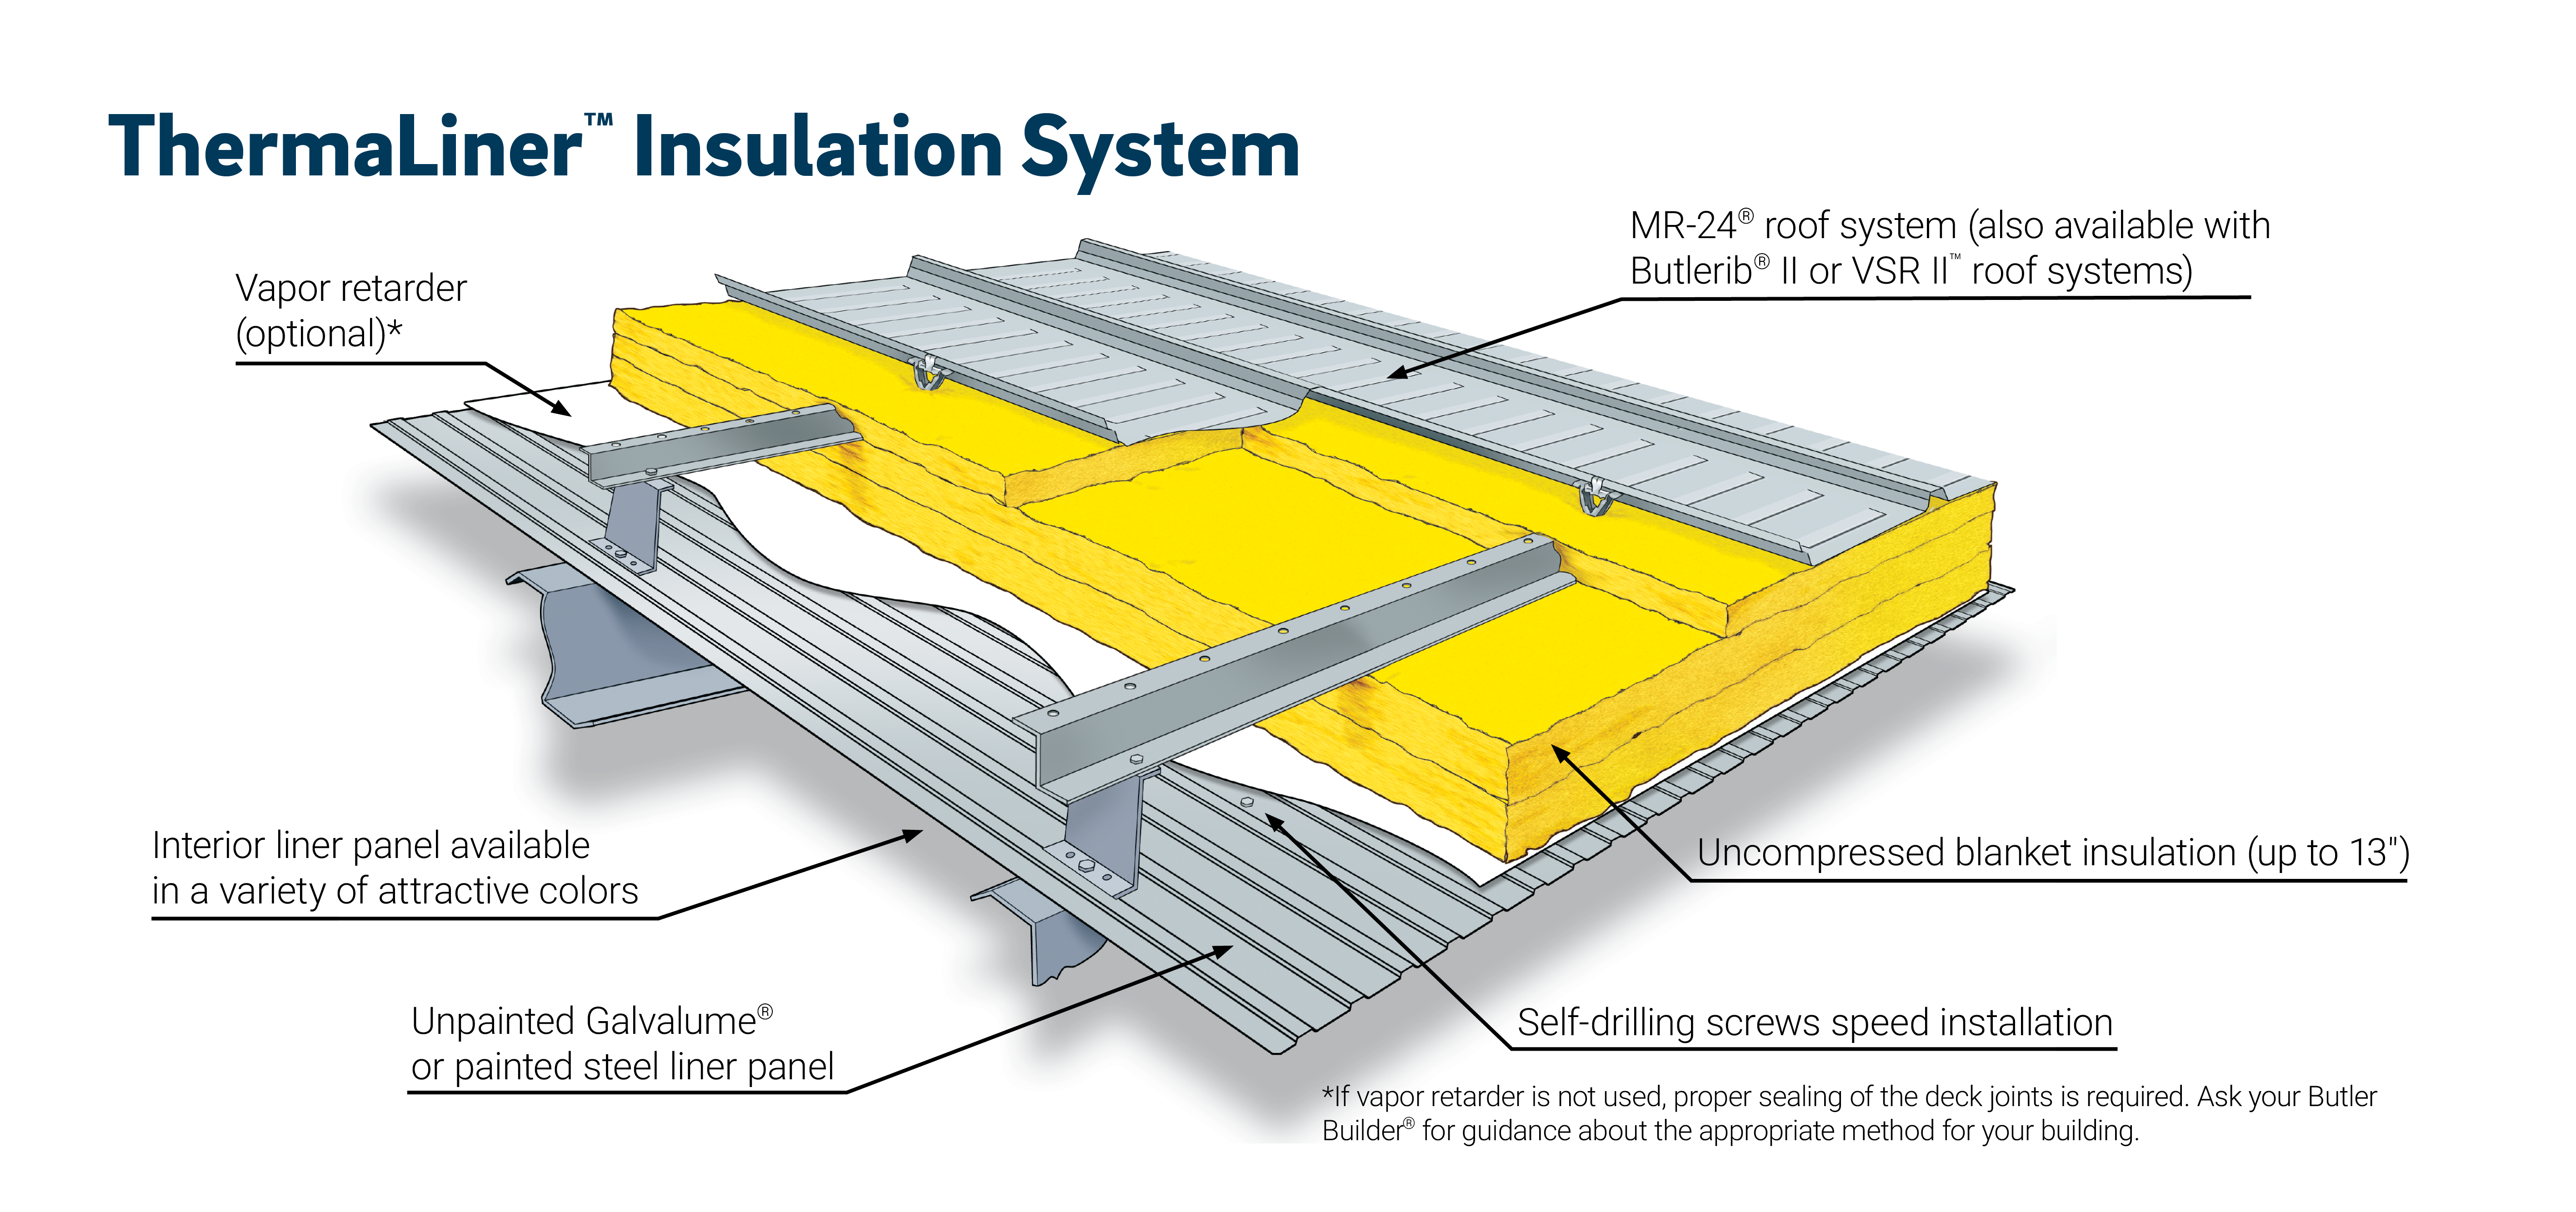 Insulation Under Metal Roof Panels di 2020